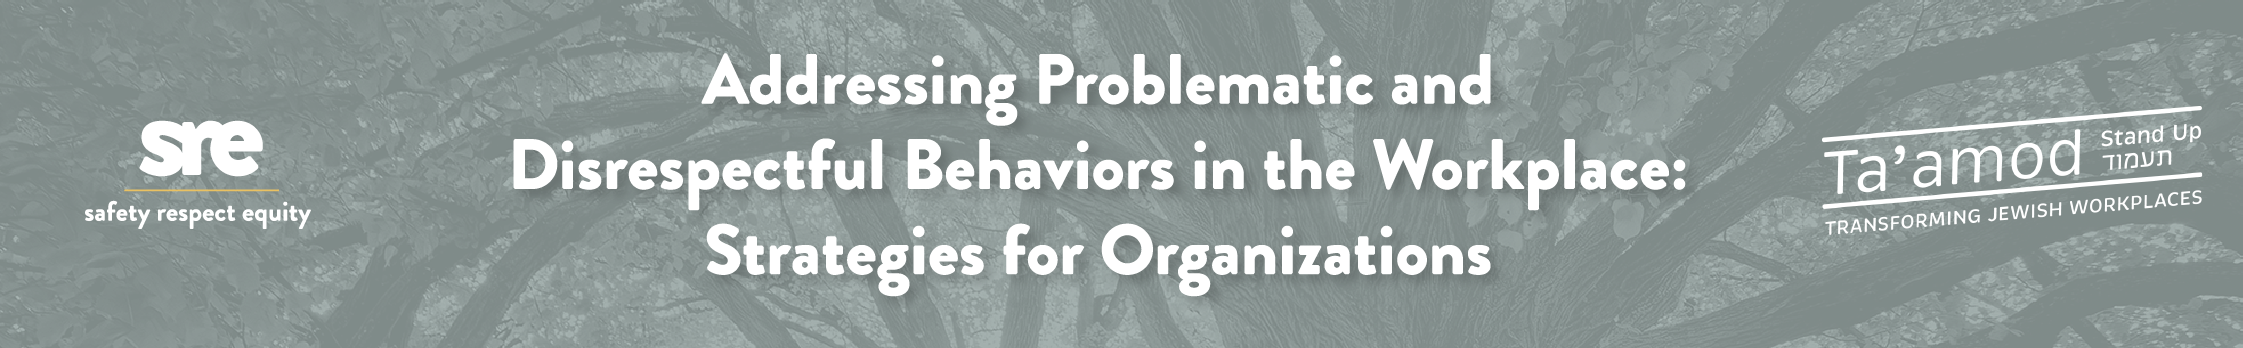 Addressing Problematic and Disrespectful Behaviors in the Workplace: Strategies for Organizations